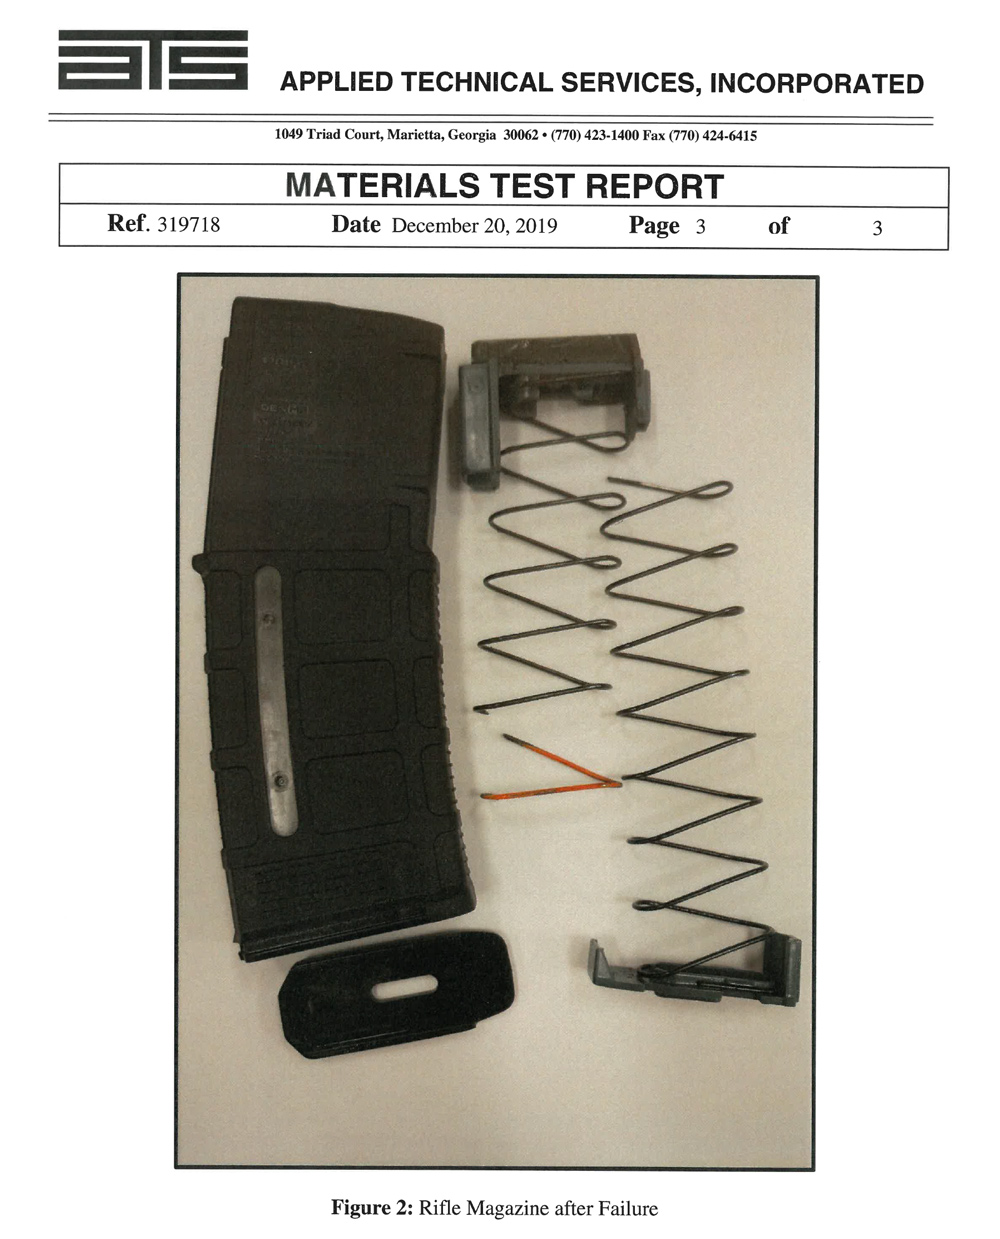 Pmag failure report from a testing facility